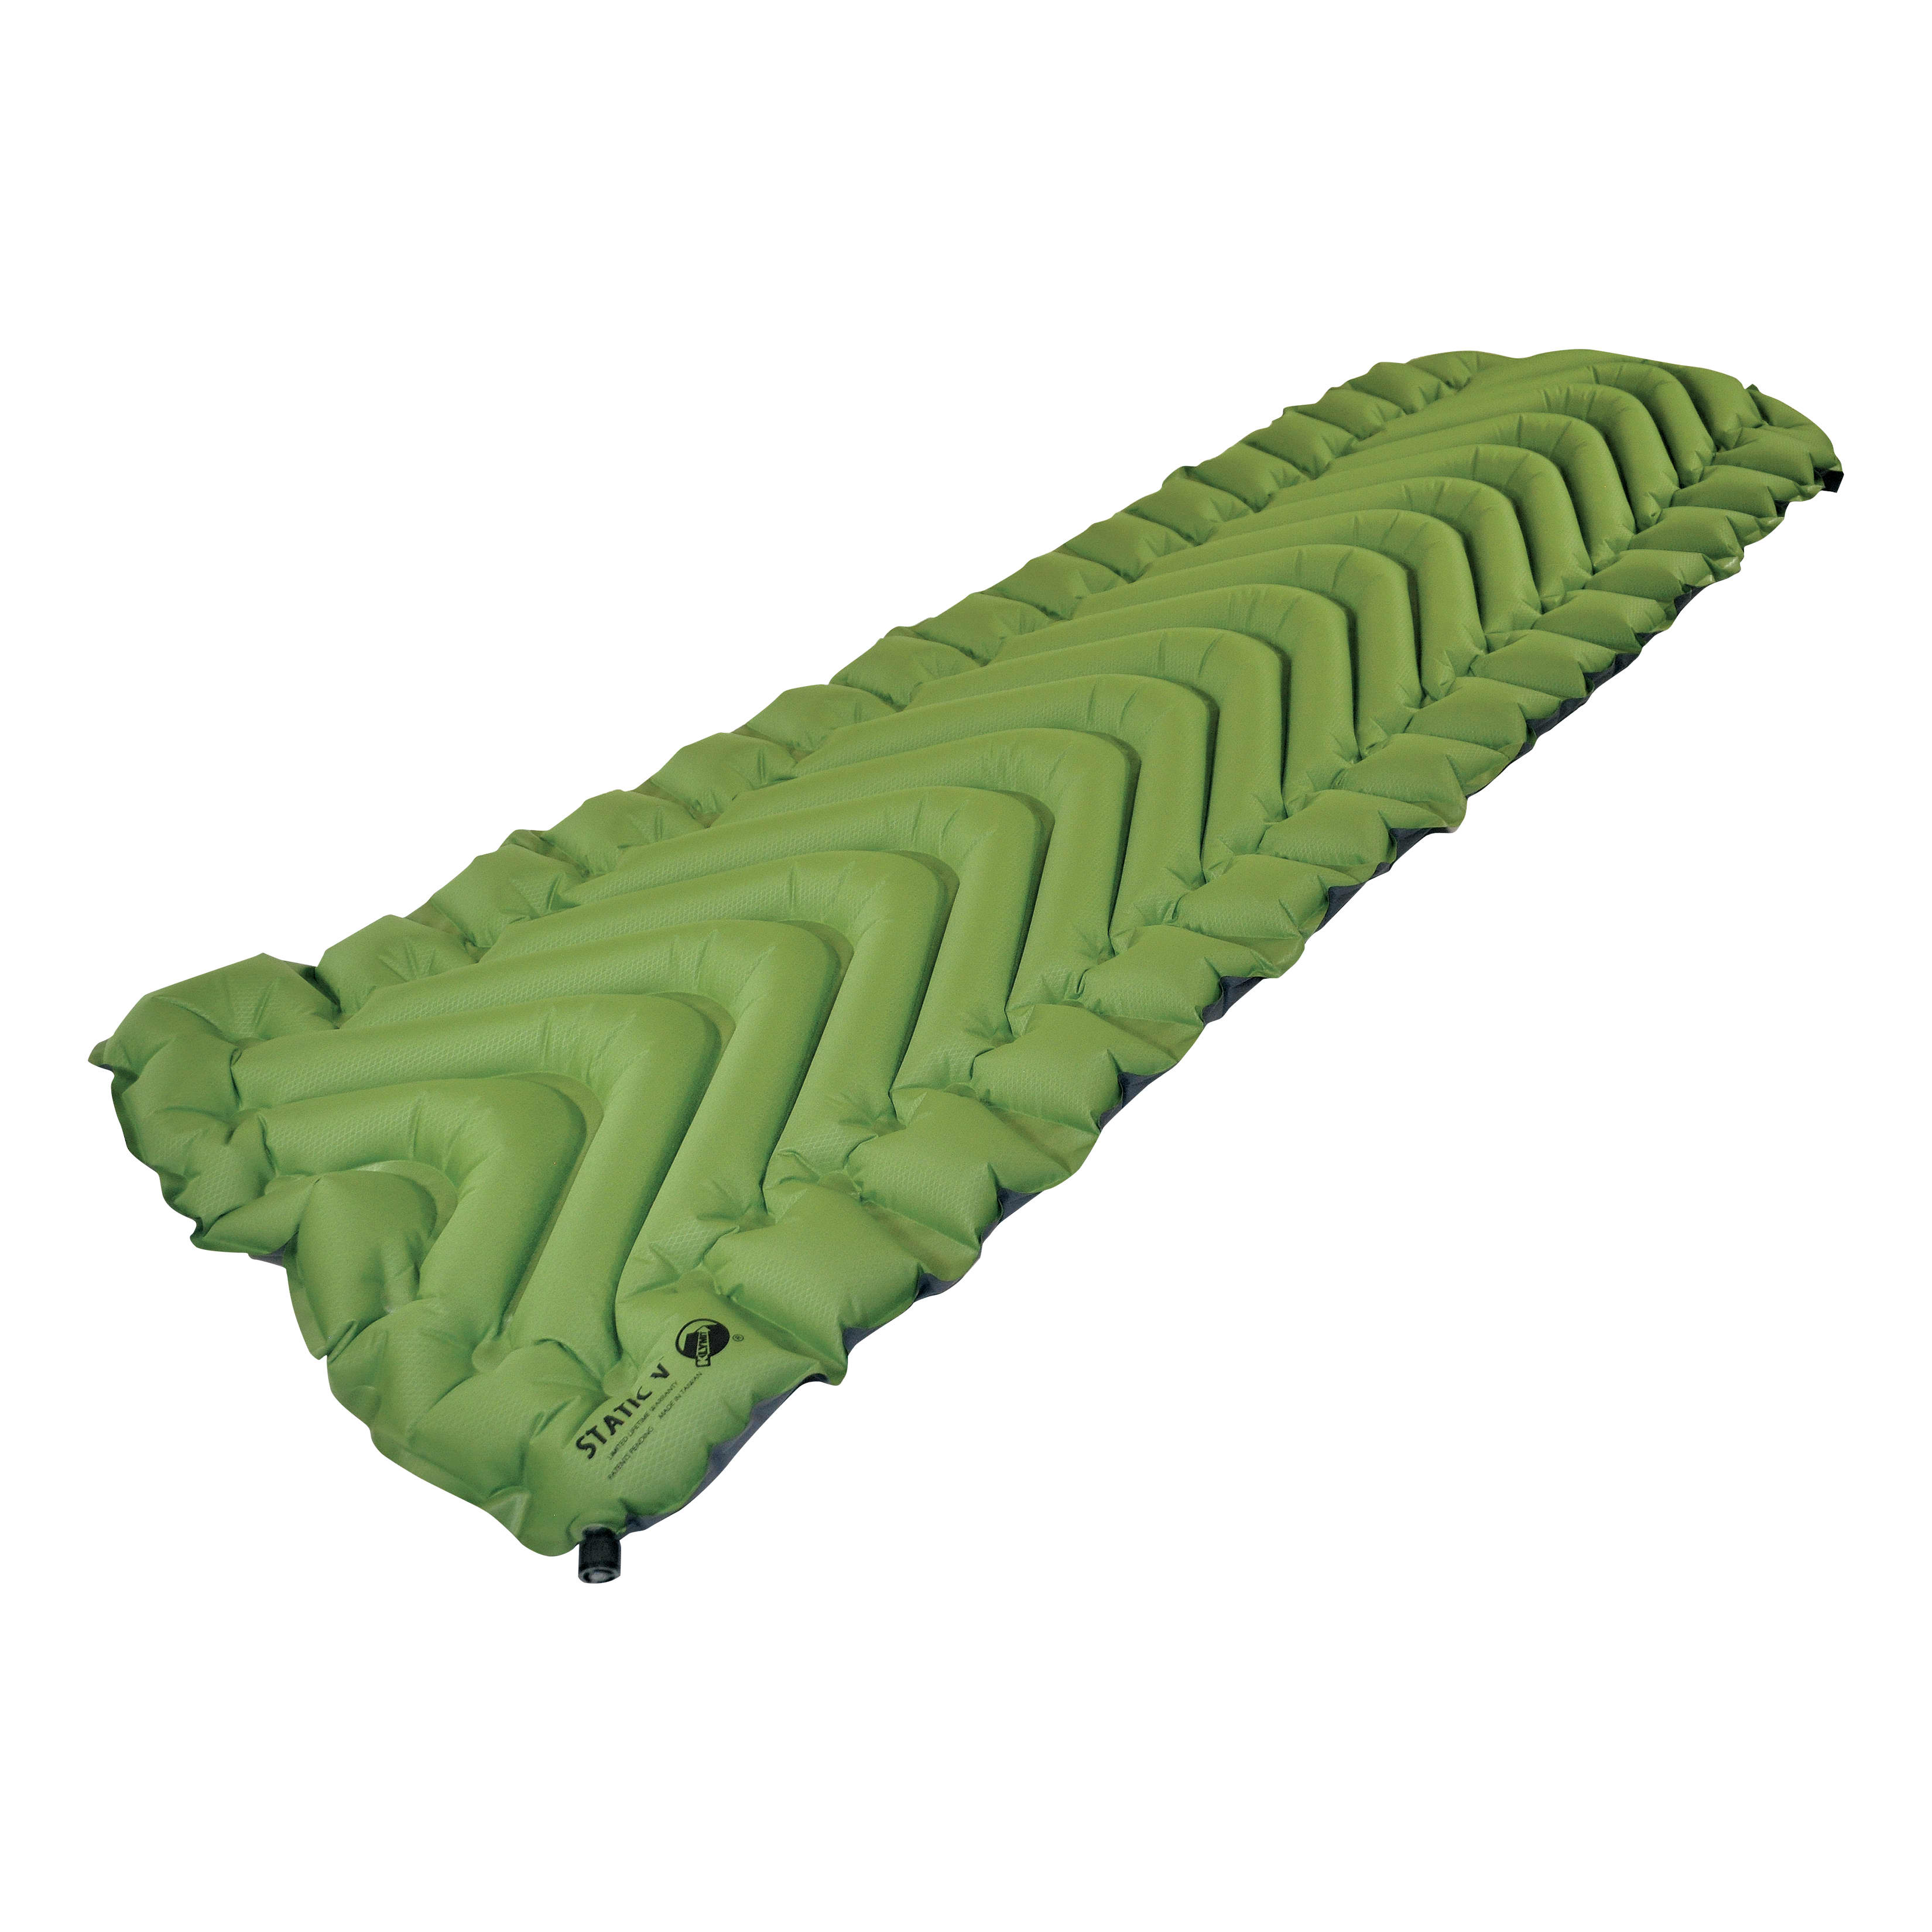 Cabela's® Deluxe Cot Pad